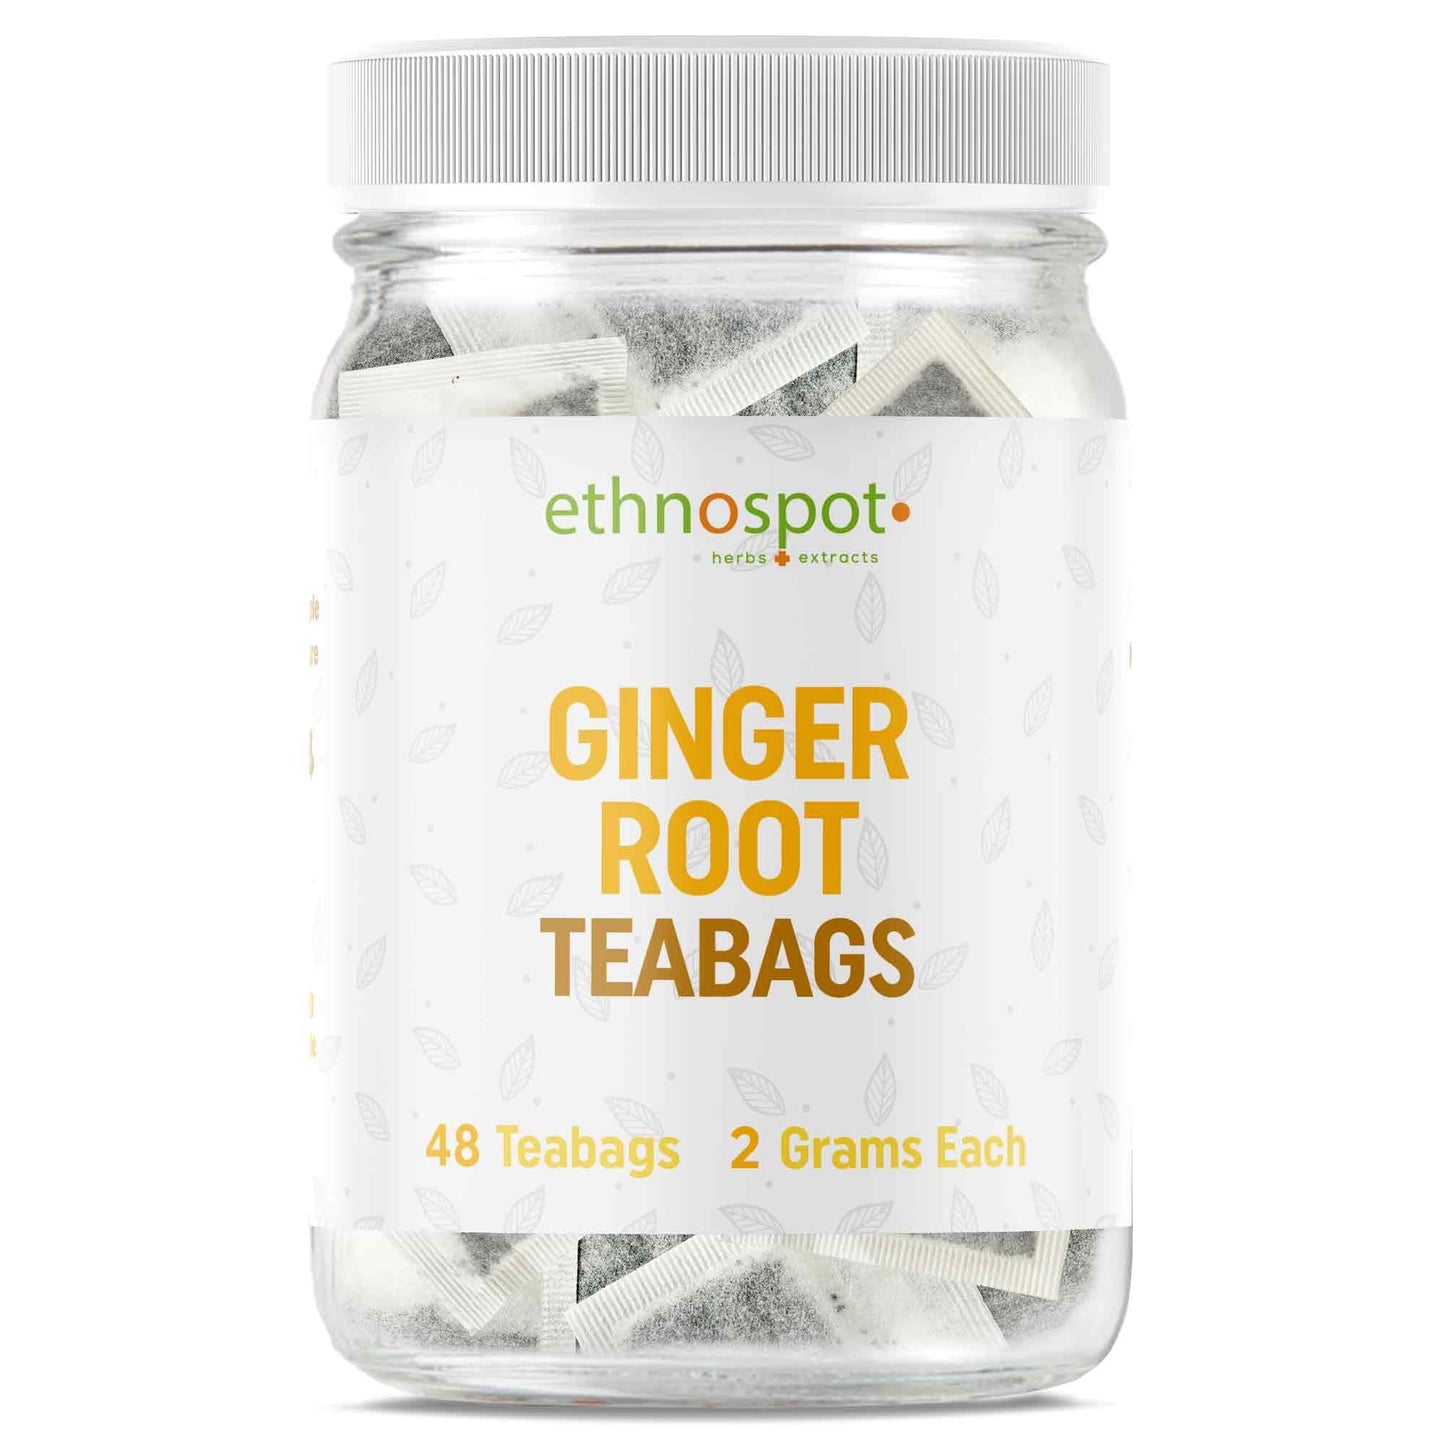 Ginger Root Teabags - Digestive Support Herbal Tea